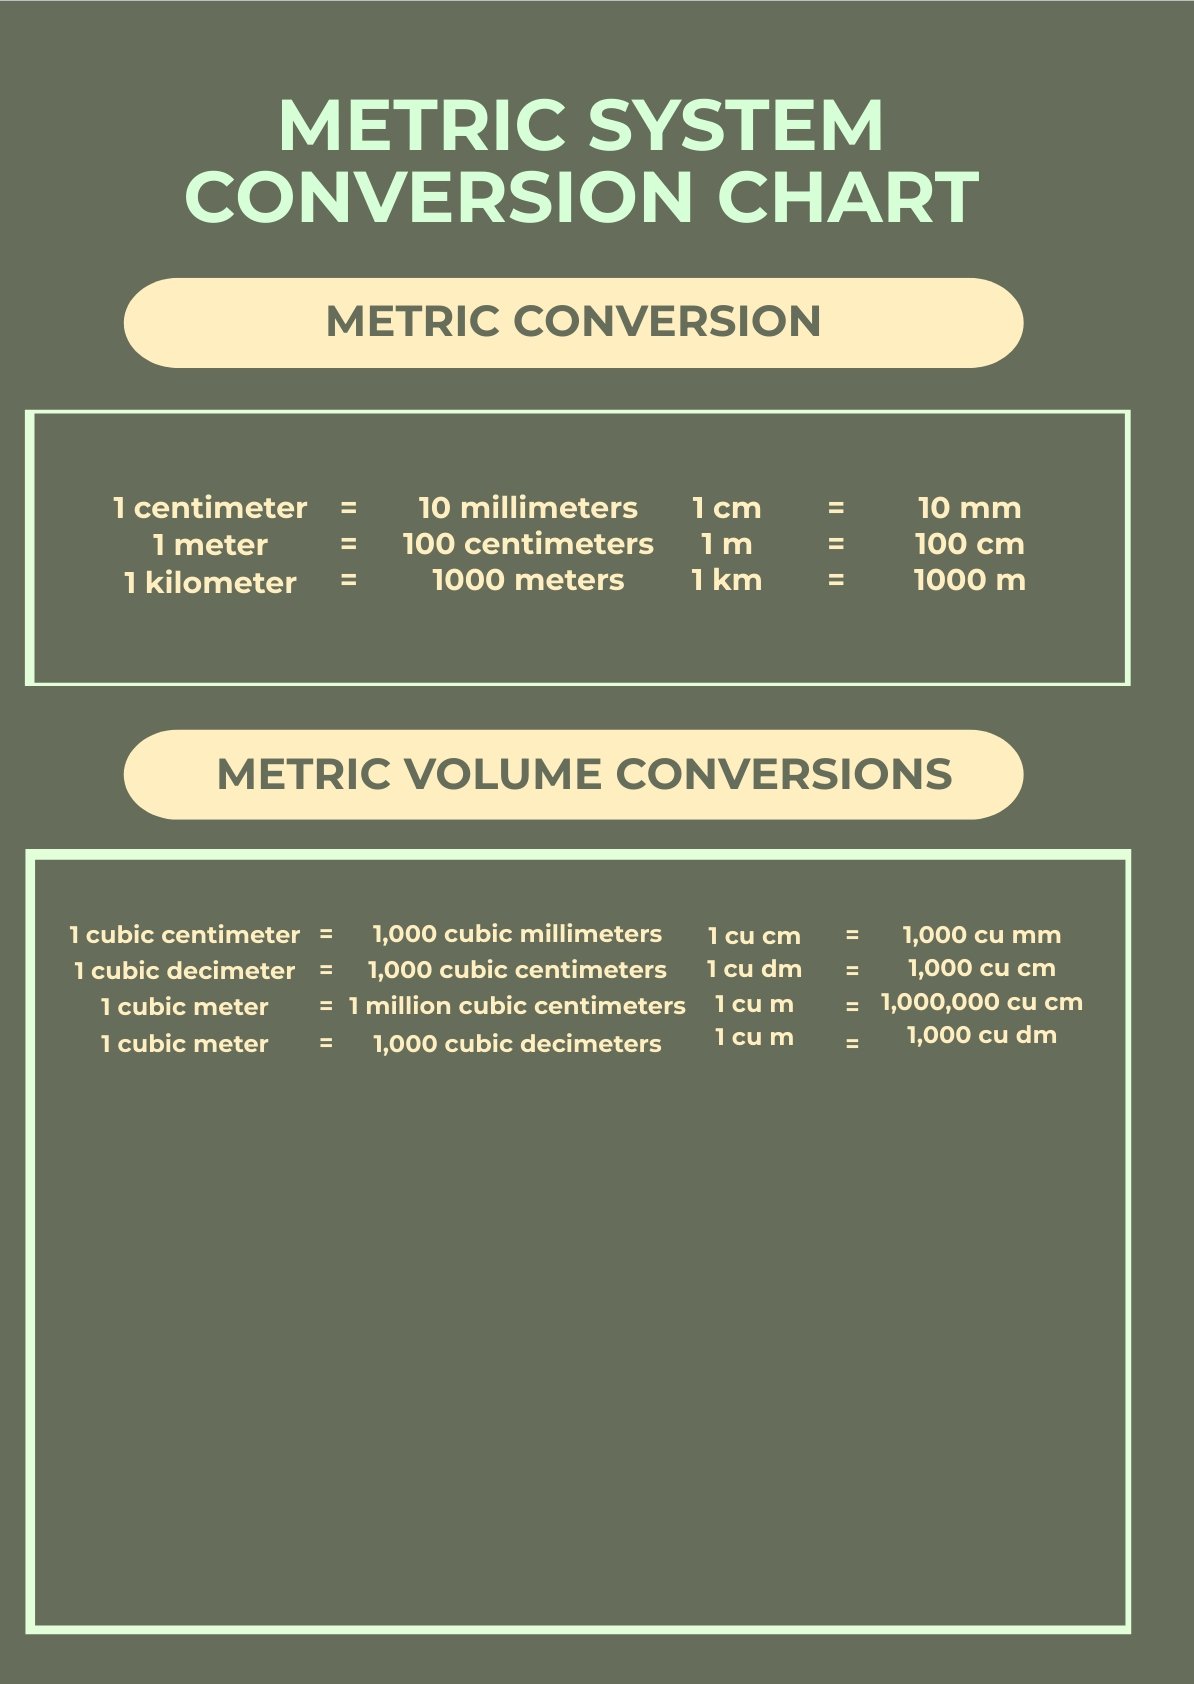 Metric Systems Conversion Chart in PDF, Illustrator